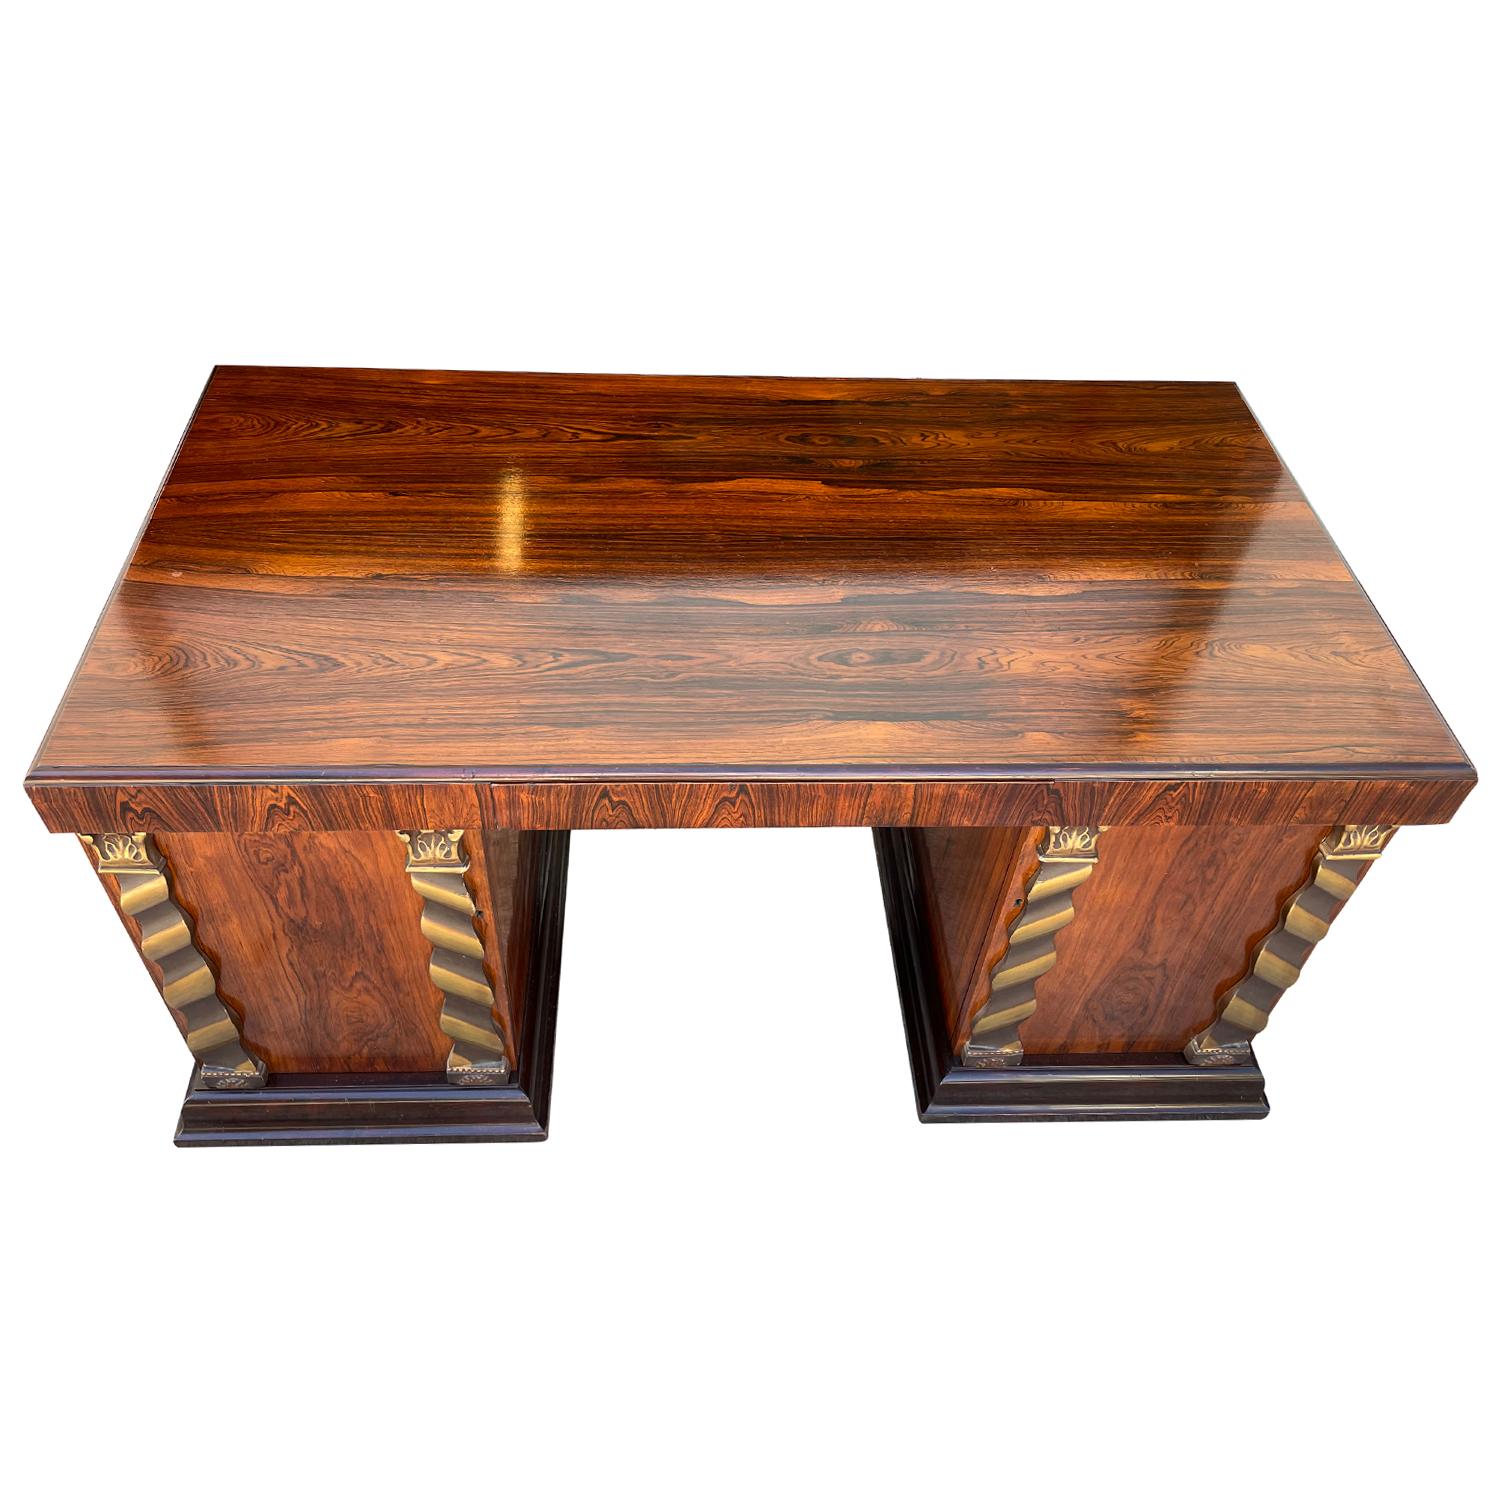 20th Century Swedish Art Deco Jacarandawood Writing Table - Vintage Bronze Desk In Good Condition For Sale In West Palm Beach, FL